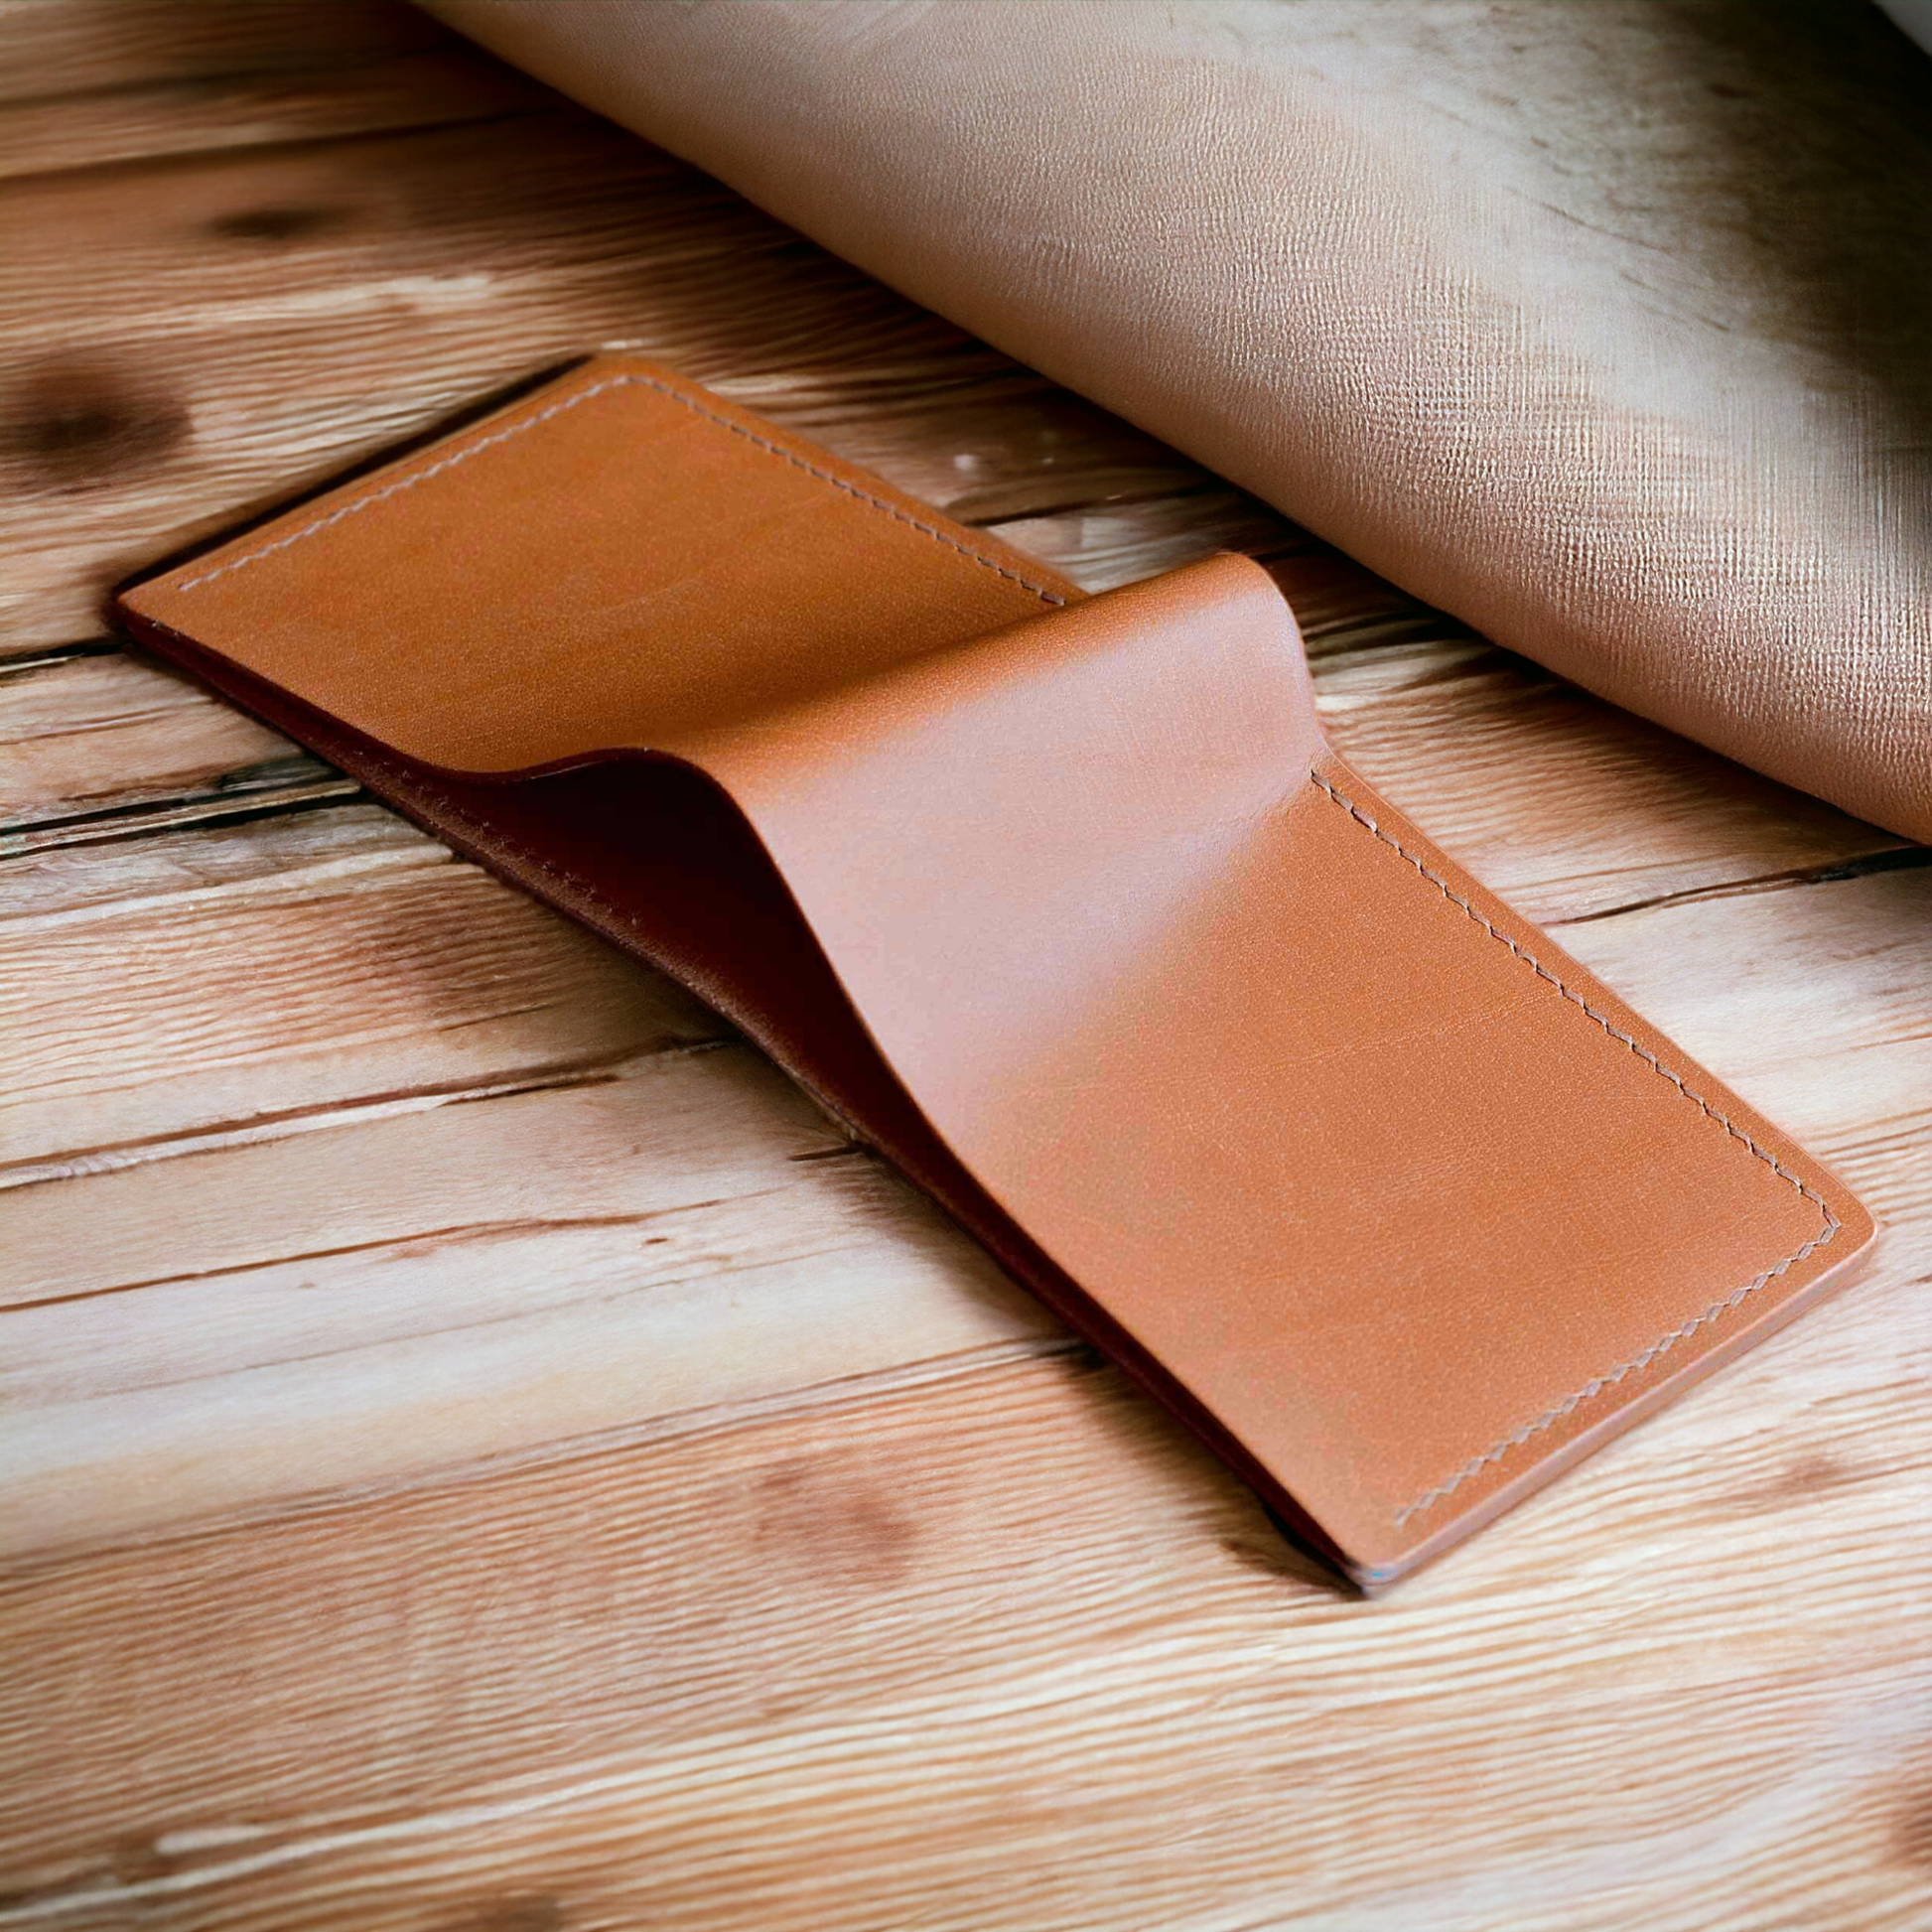 This is our classic wallet in chestnut leather